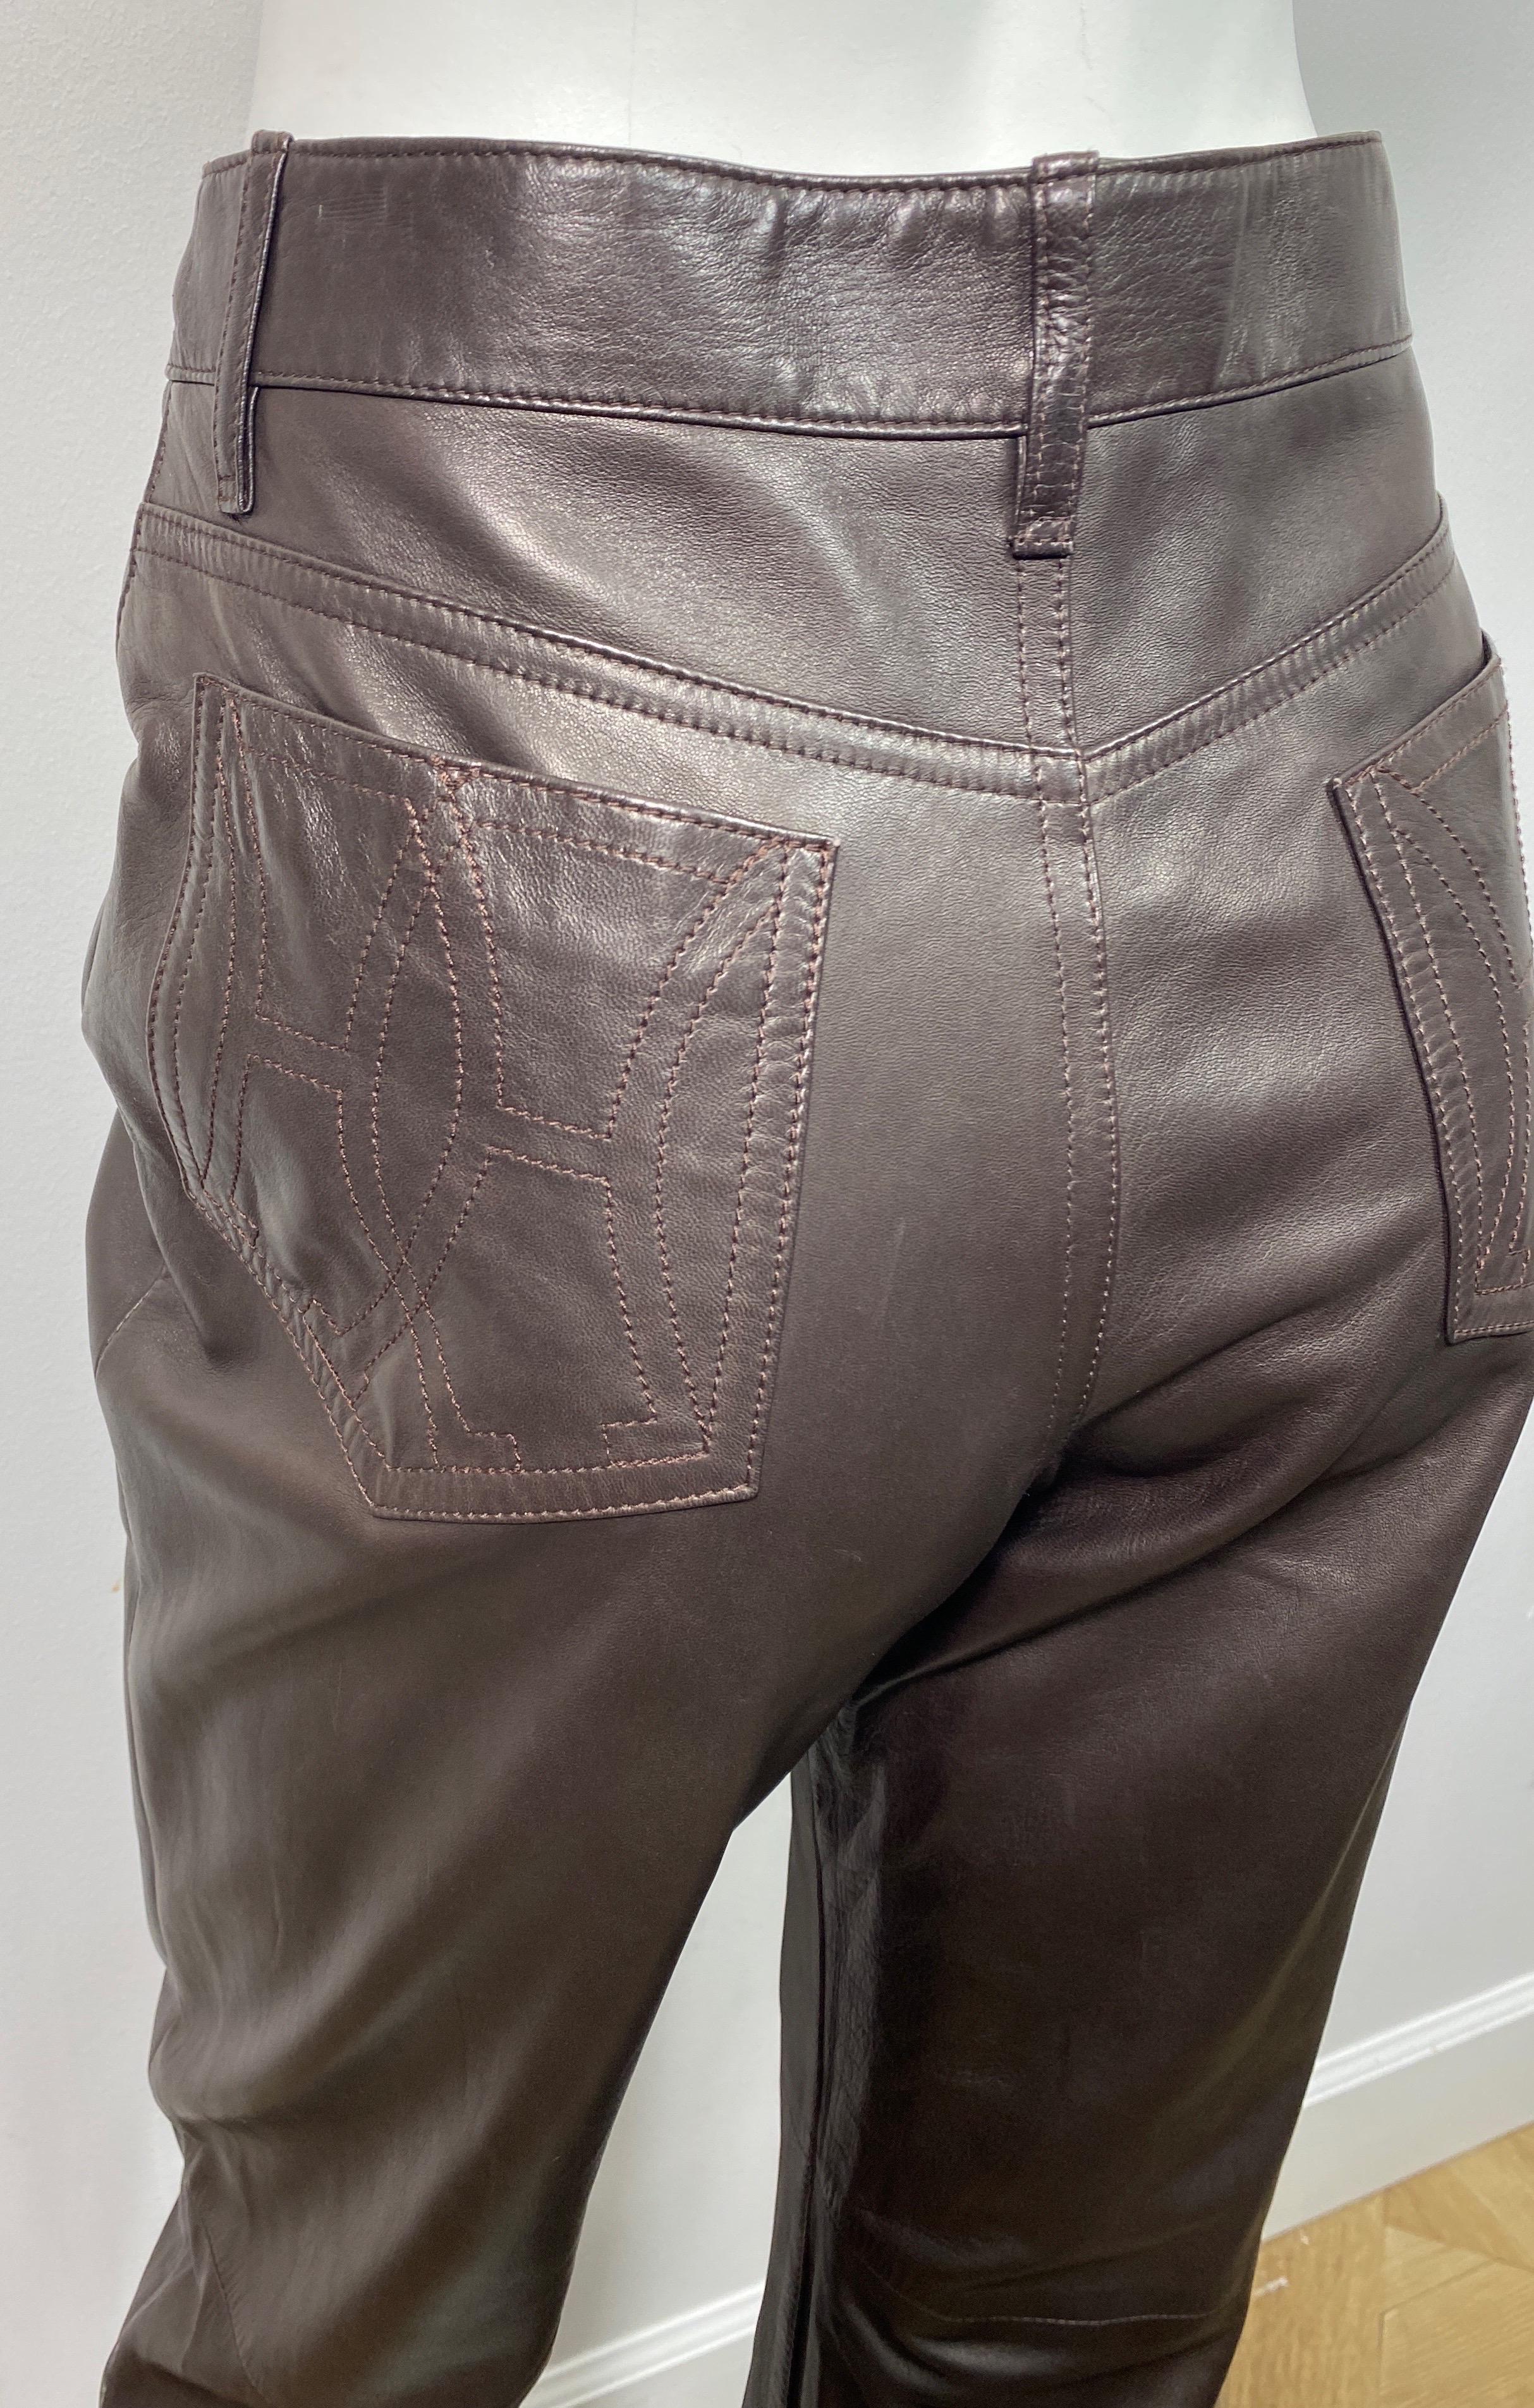 Hermes 1990’s Vintage Chocolate Brown Jean Style Leather Pants - Size 42 For Sale 10